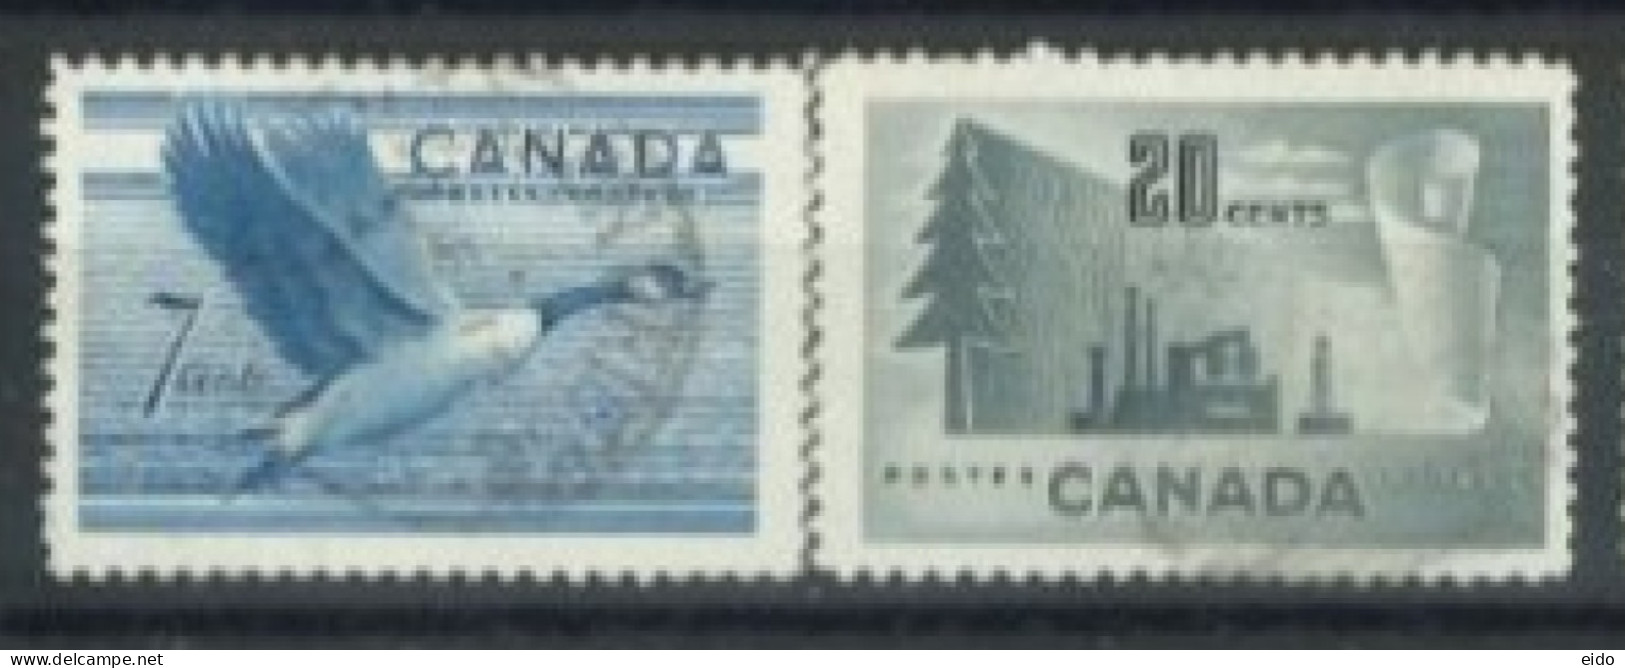 CANADA - 1951/52, CANADIAN GOOSE & FORESTY PRODUCTS STAMPS SET OF 2, USED. - Used Stamps